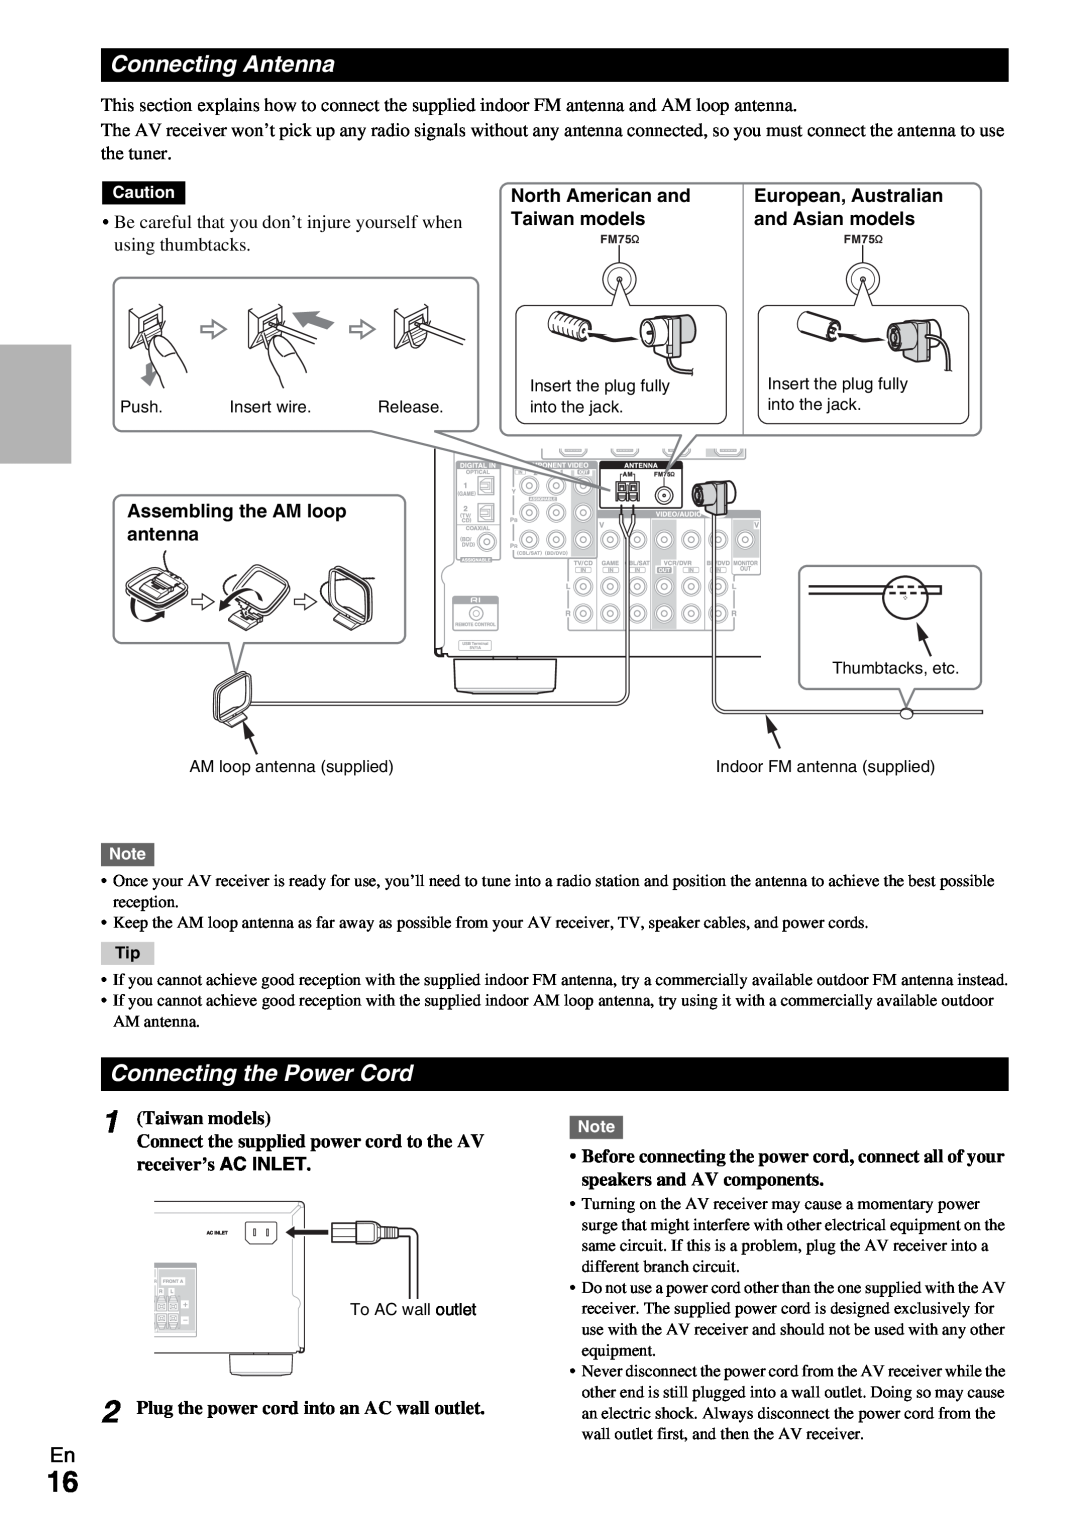 Onkyo TX-SR309 instruction manual Connecting Antenna, Connecting the Power Cord, North American and, Taiwan models 